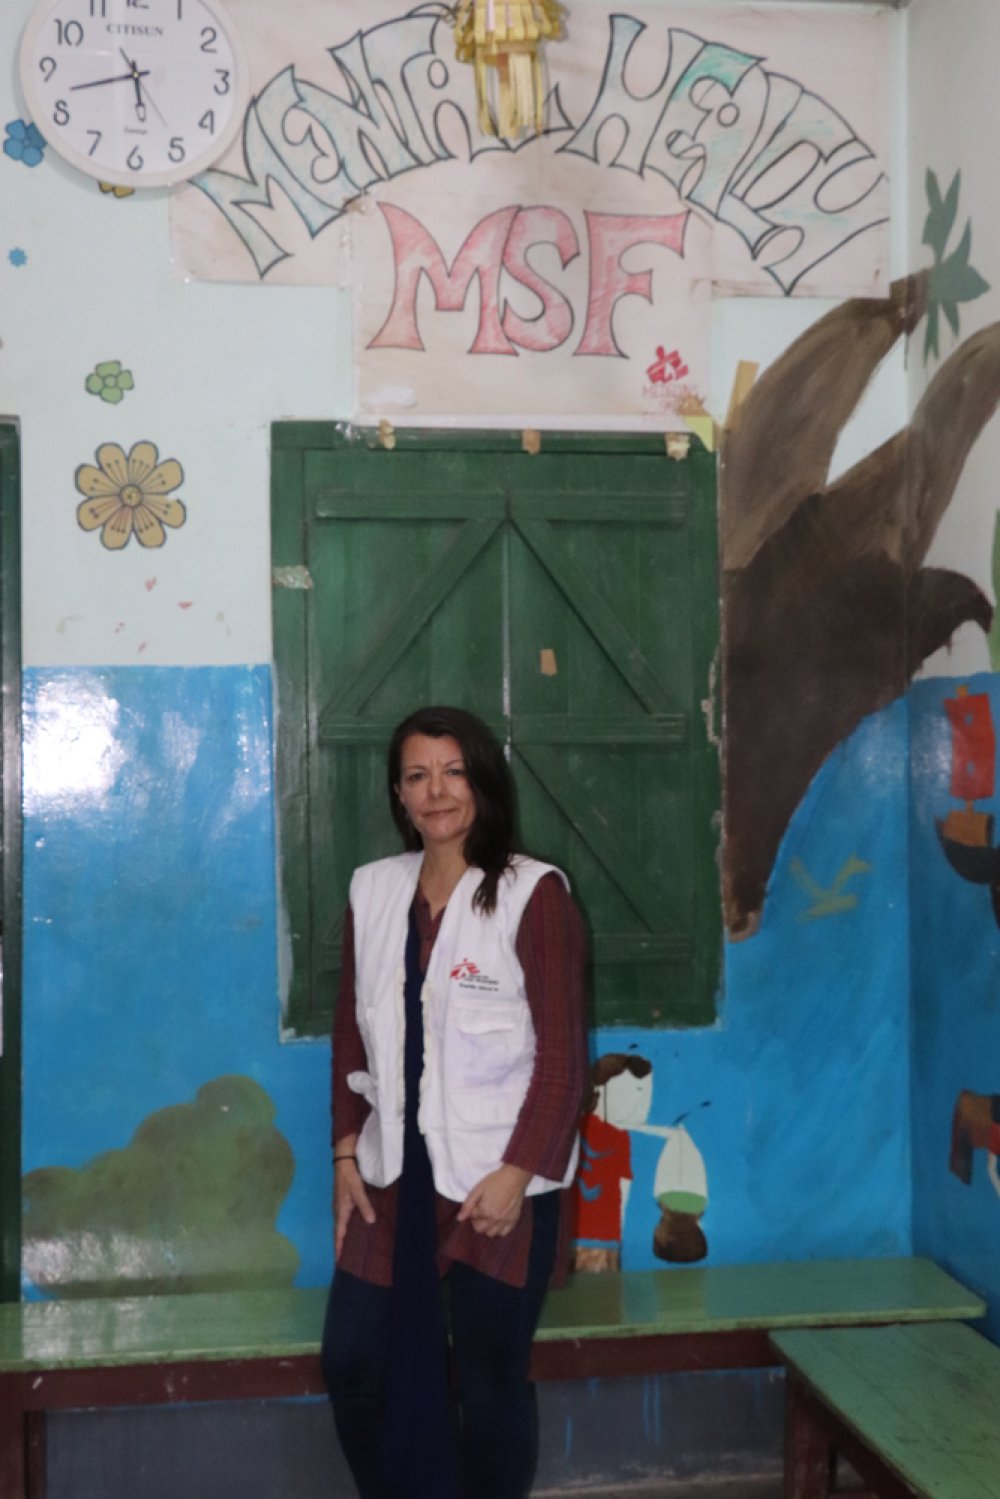 Kathy Lostos, working as a Mental Health Activity Manager in MSF’s Kutupalong facility.